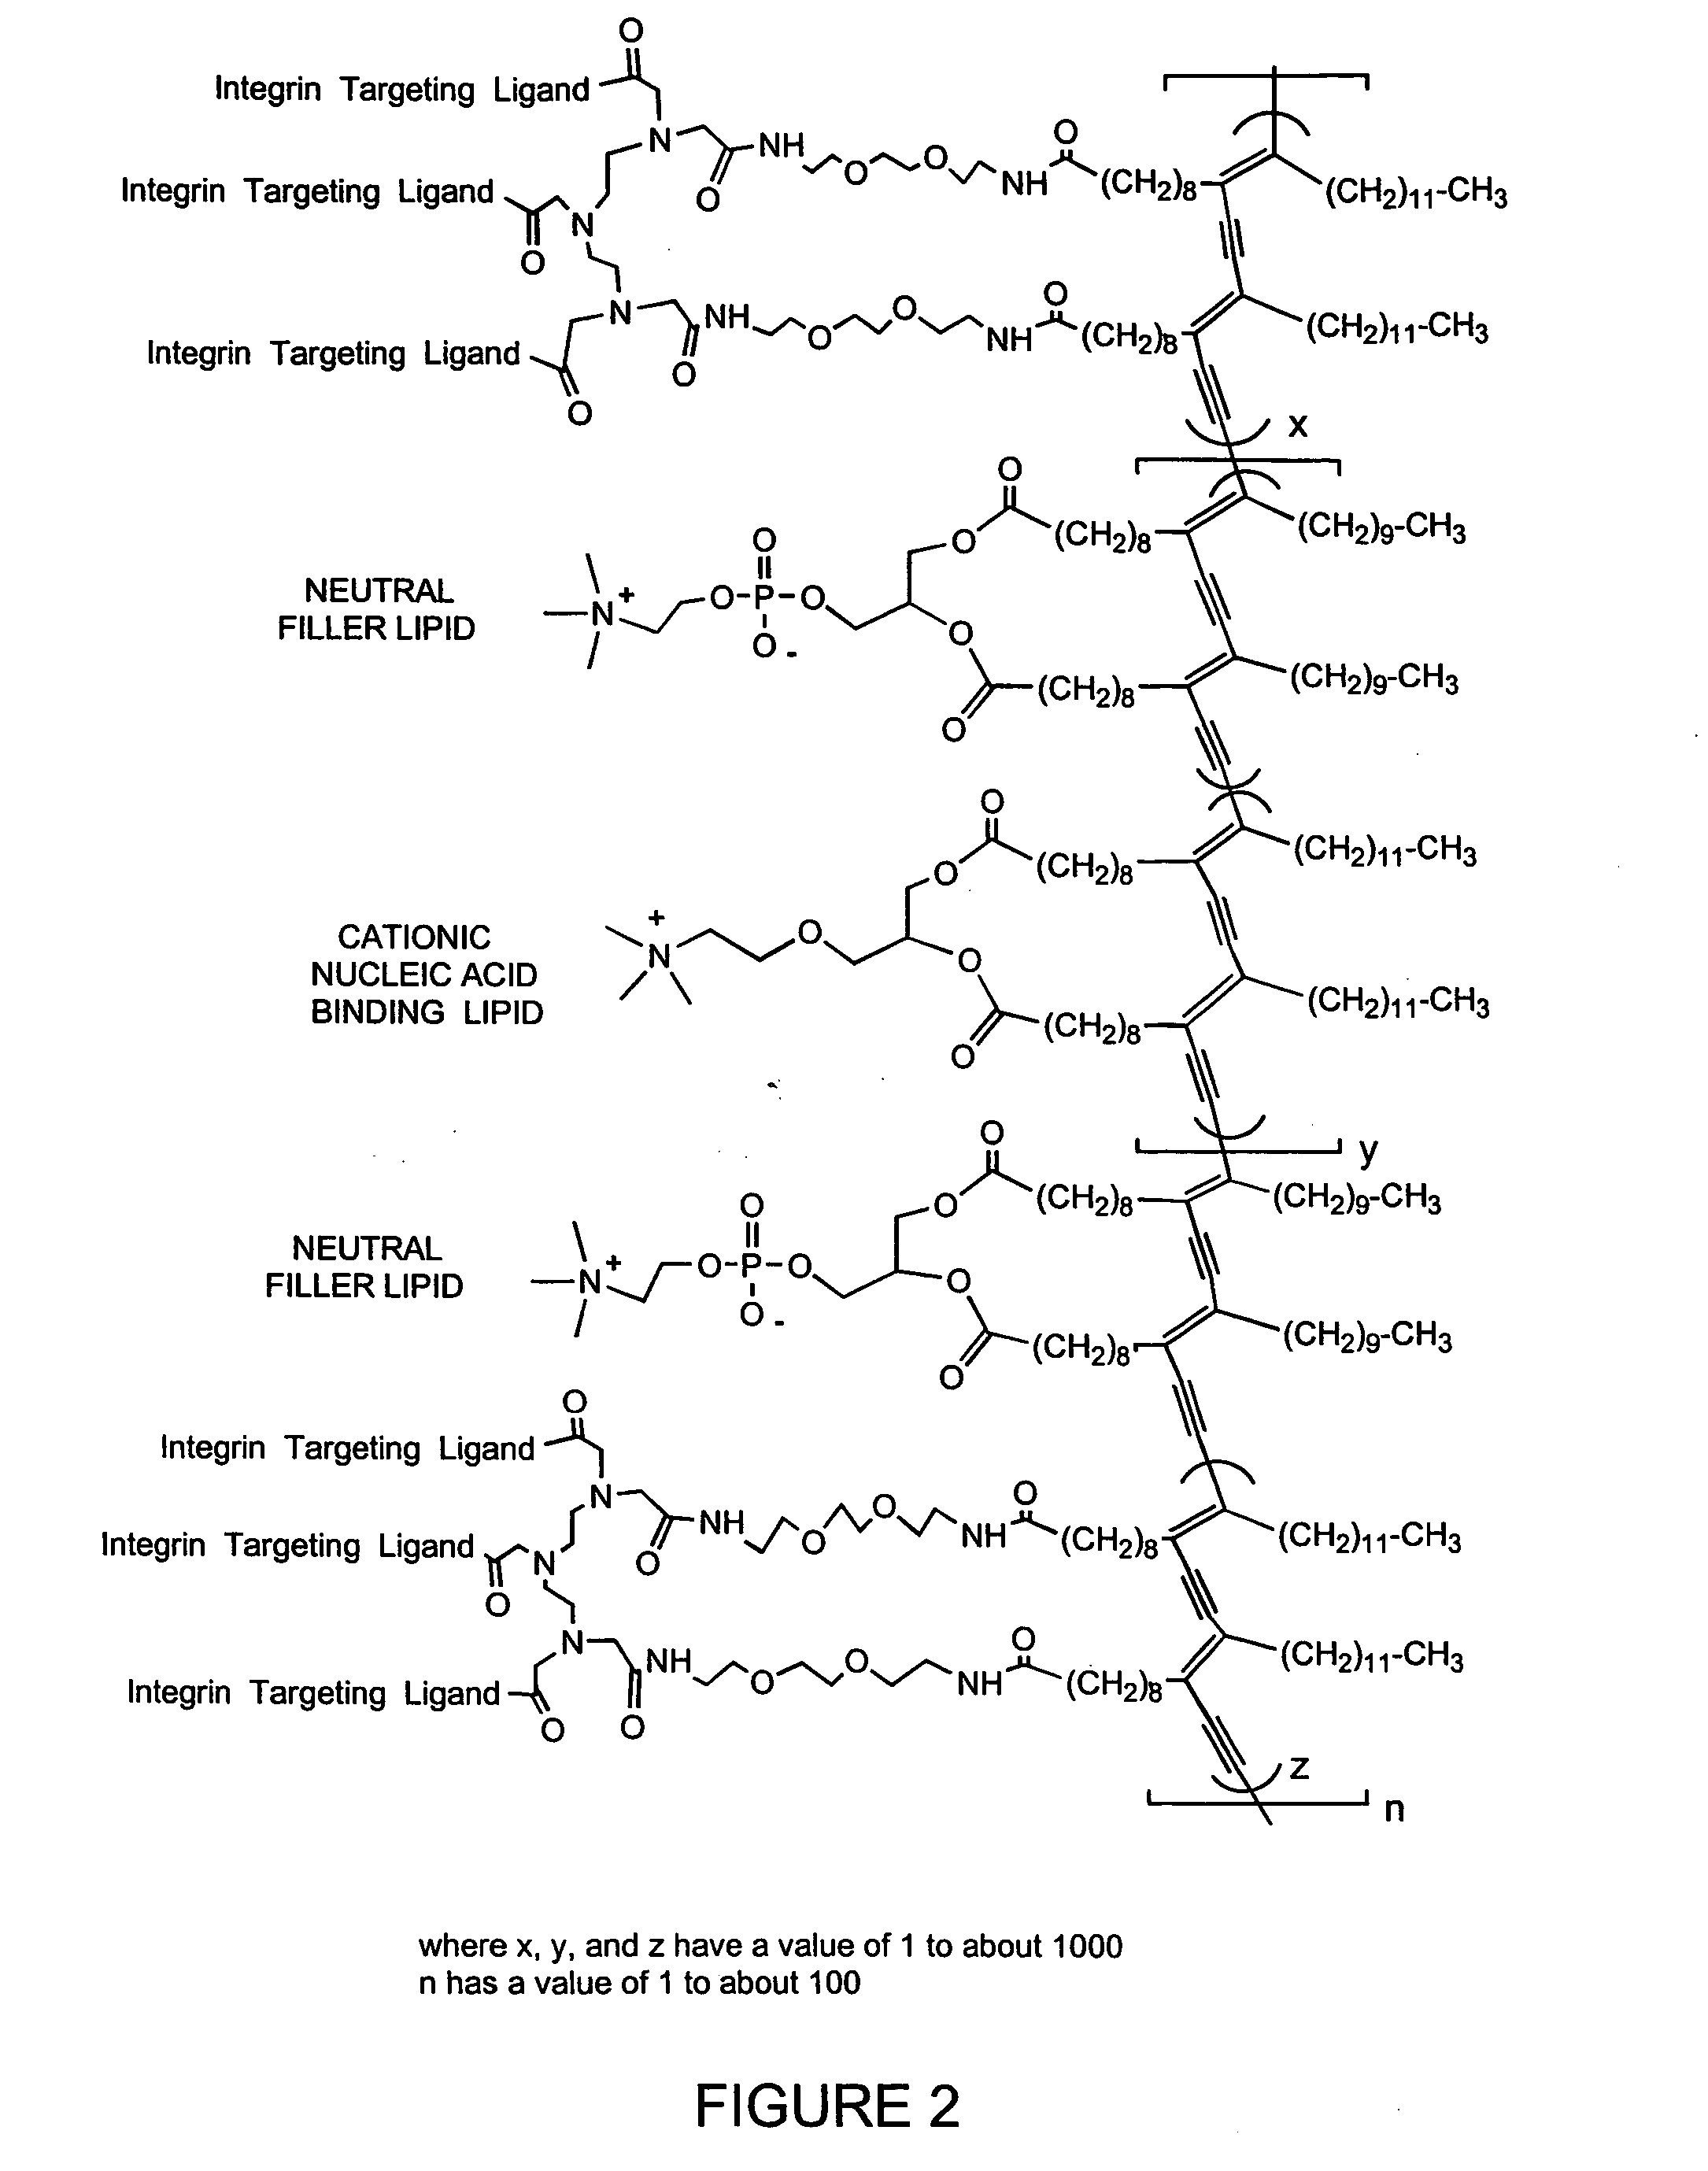 Delivery system for nucleic acids